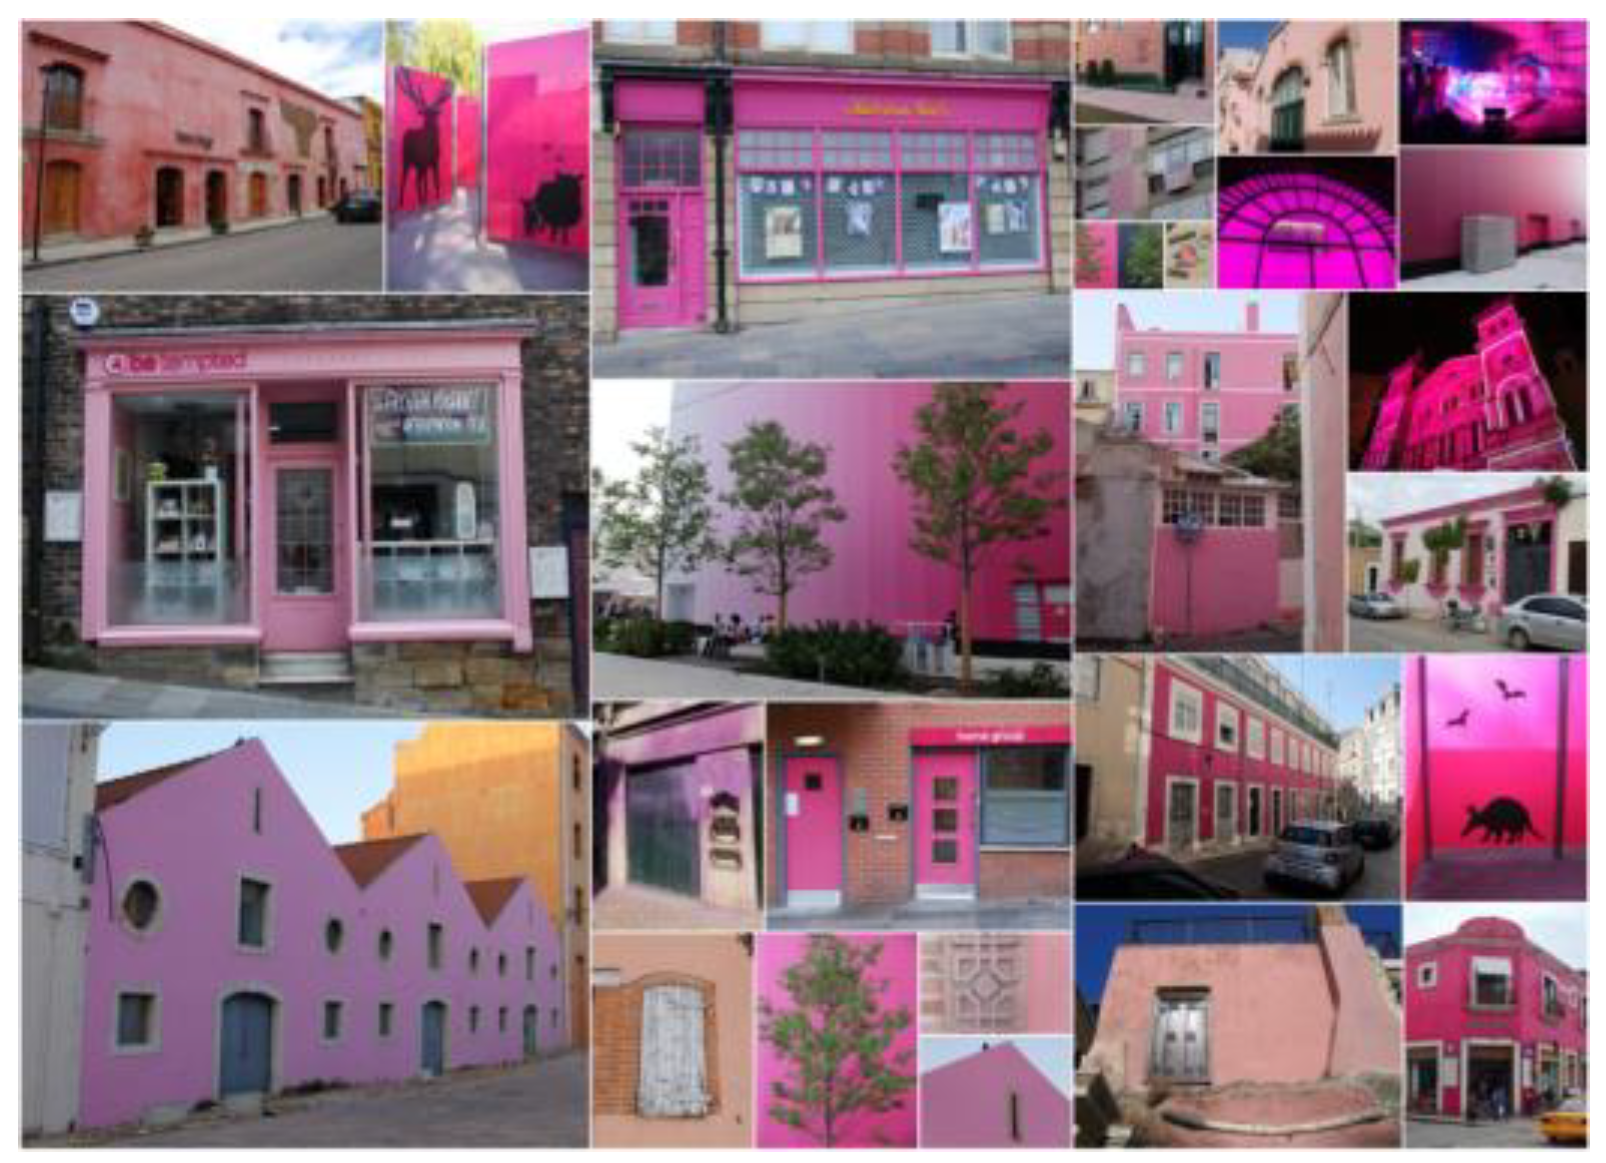 Contemporary Environment: Full-Text in Pink”—The Symbolism, | Applications and and in “Pretty Pink the Color Built Architecture Arts | Traditions, Free